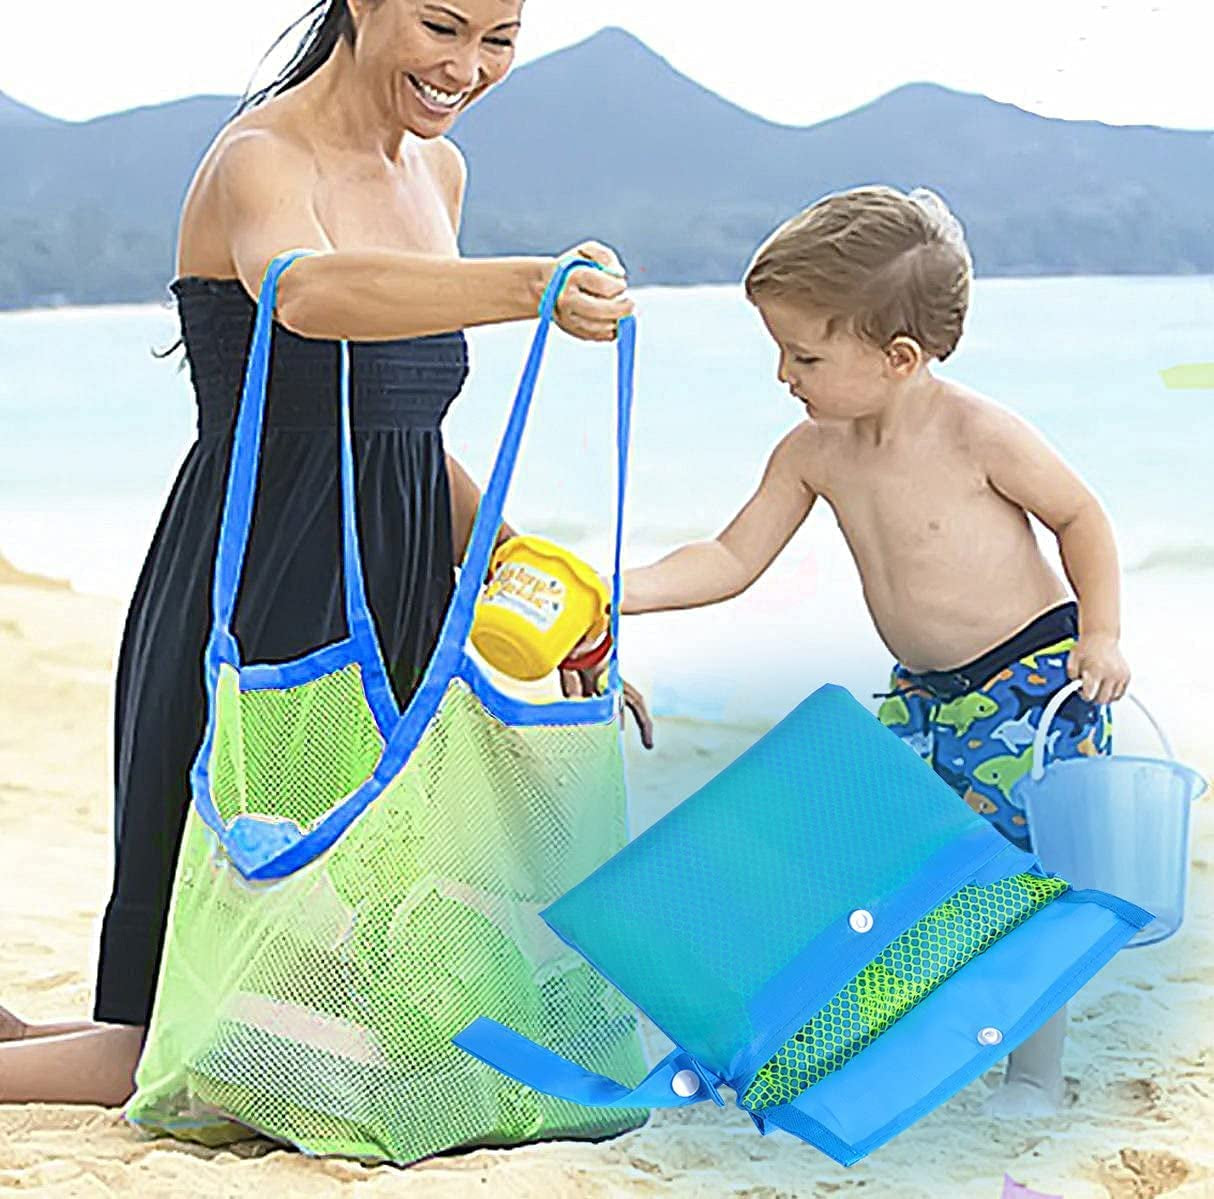 Cafurty Extra Large Mesh Beach Bag Tote Bag Beach Necessaries Stay Away from Sand, Large Netted Beach Bag for Holding Children Toys - Green